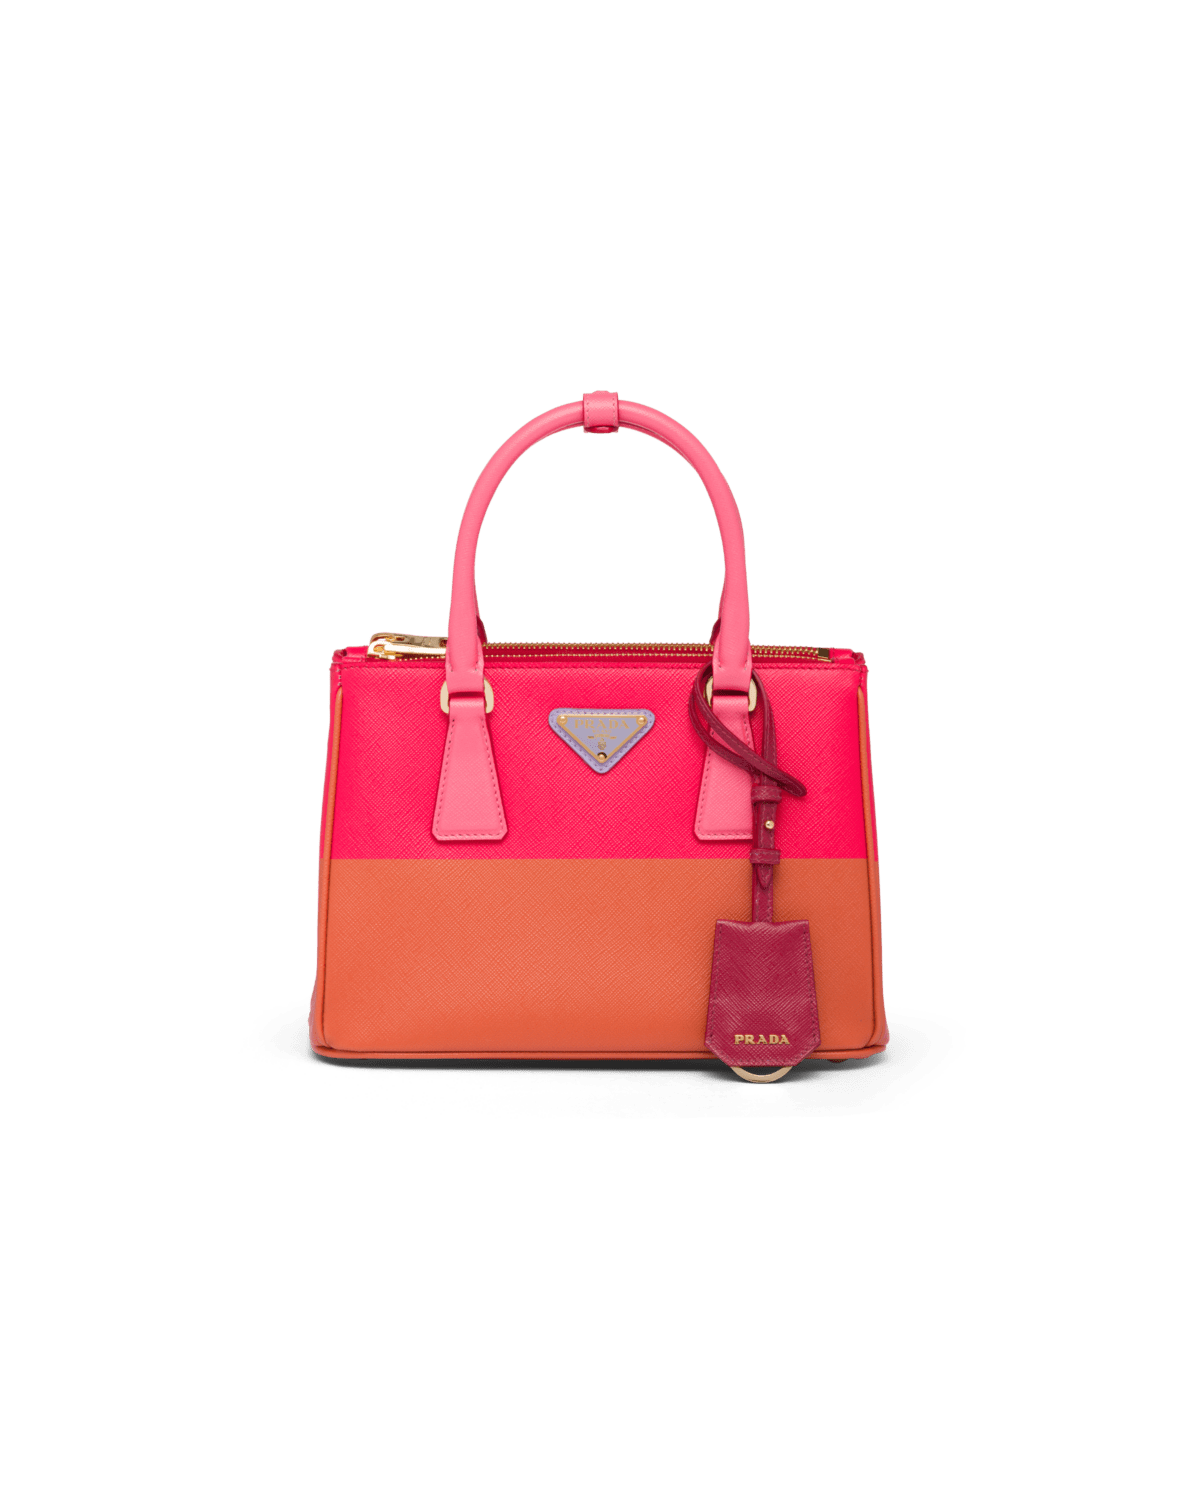 The Return Of A Classic: Why The Prada Galleria Bag Will Forever Hold A  Special Place in Our Hearts